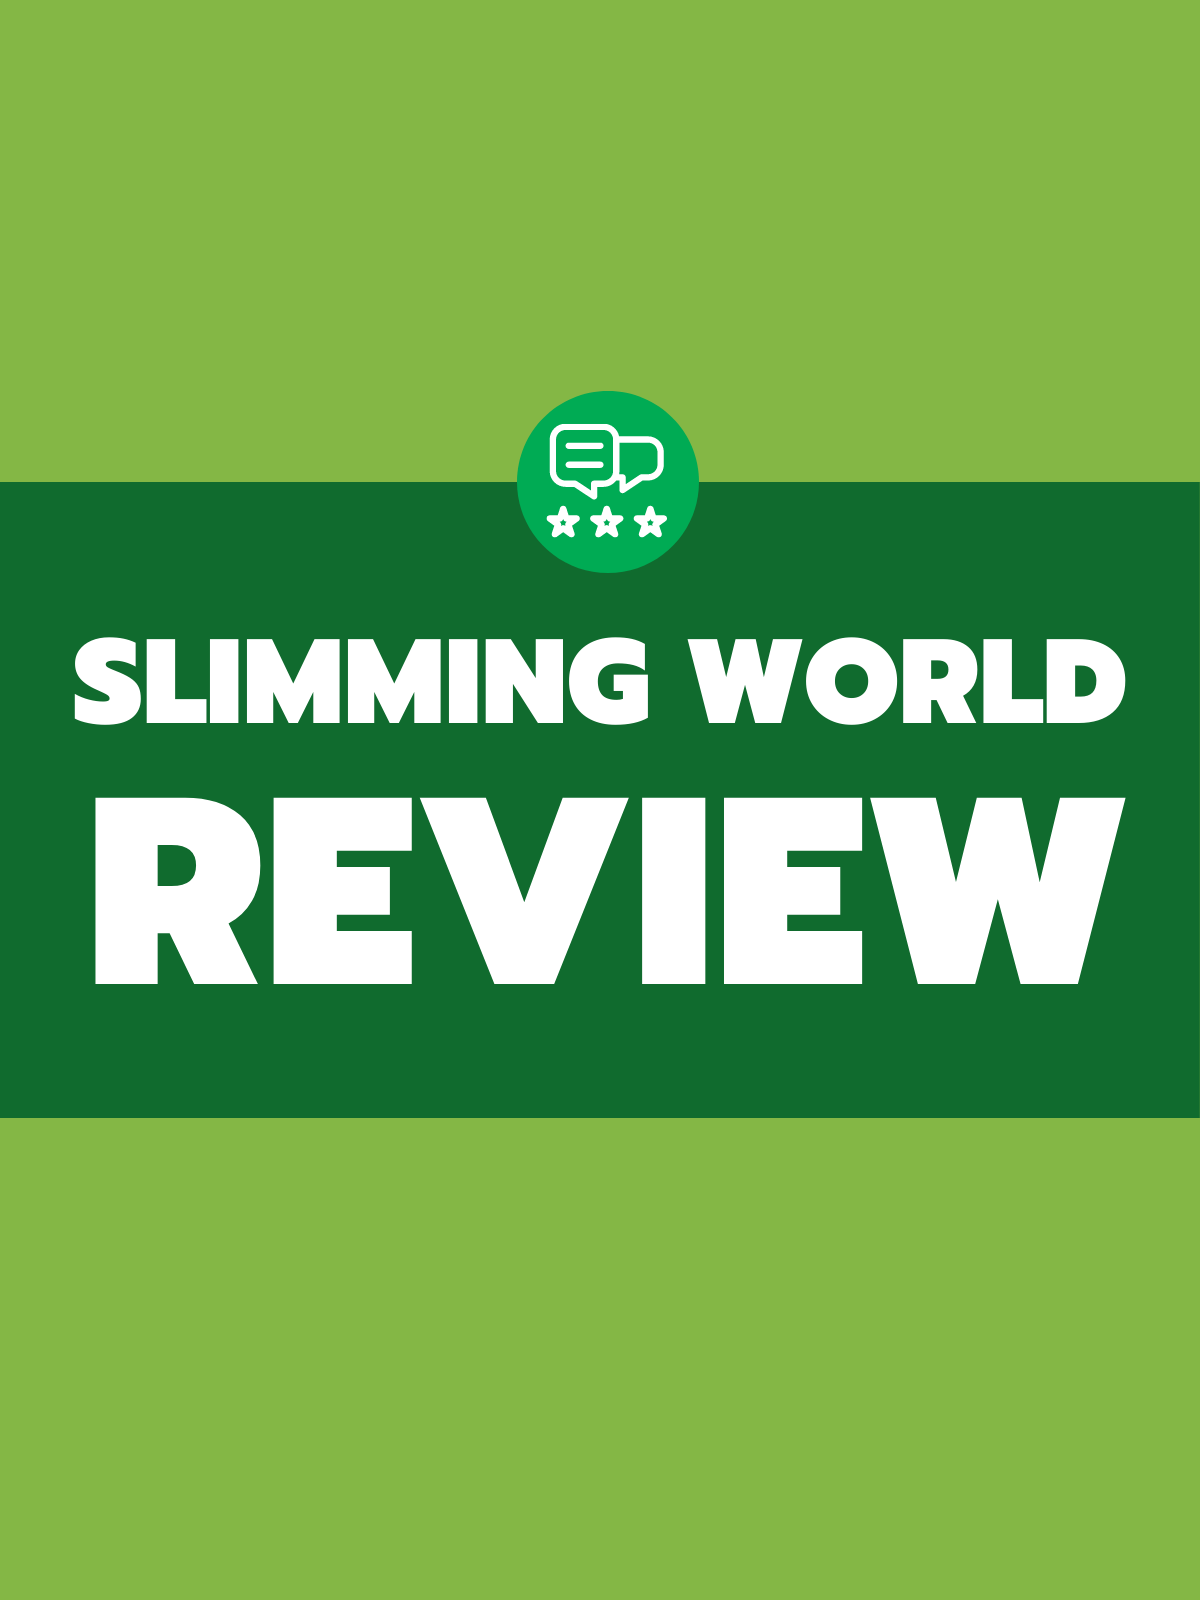 slimming world review image